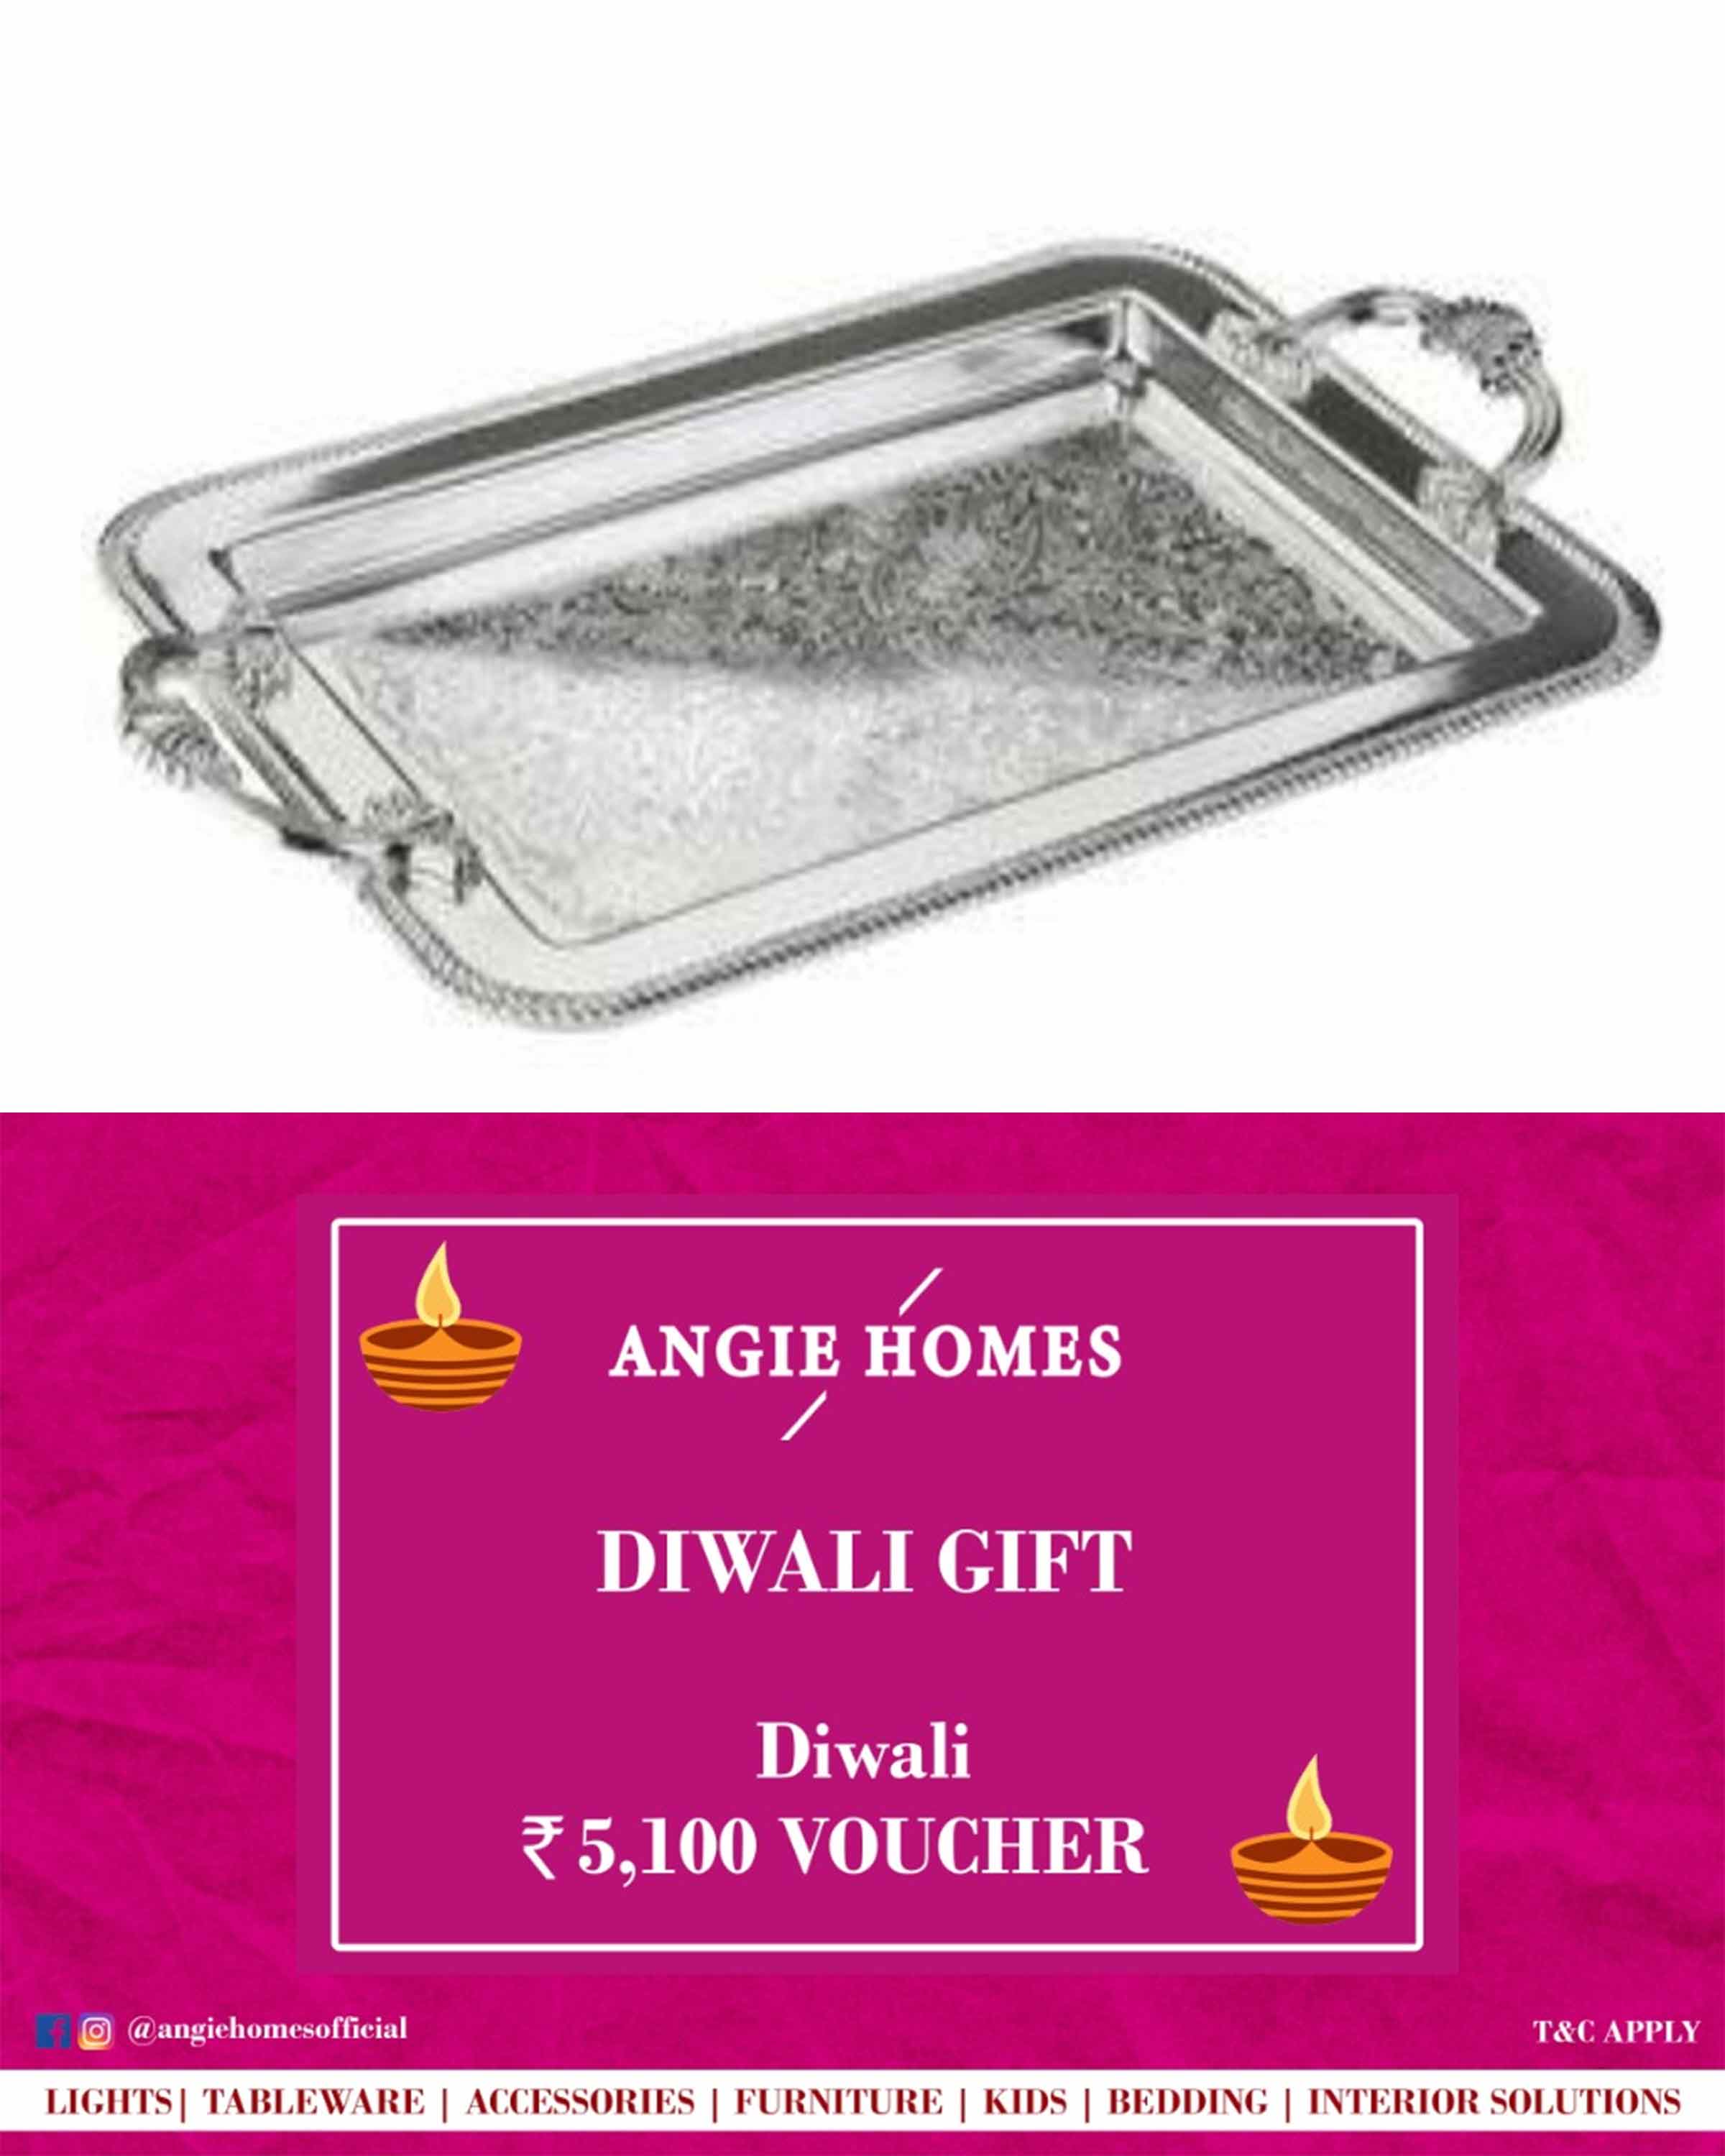 Online Diwali Gift Card Voucher for Silver Plated Rectangle Tray | Serveware ANGIE HOMES